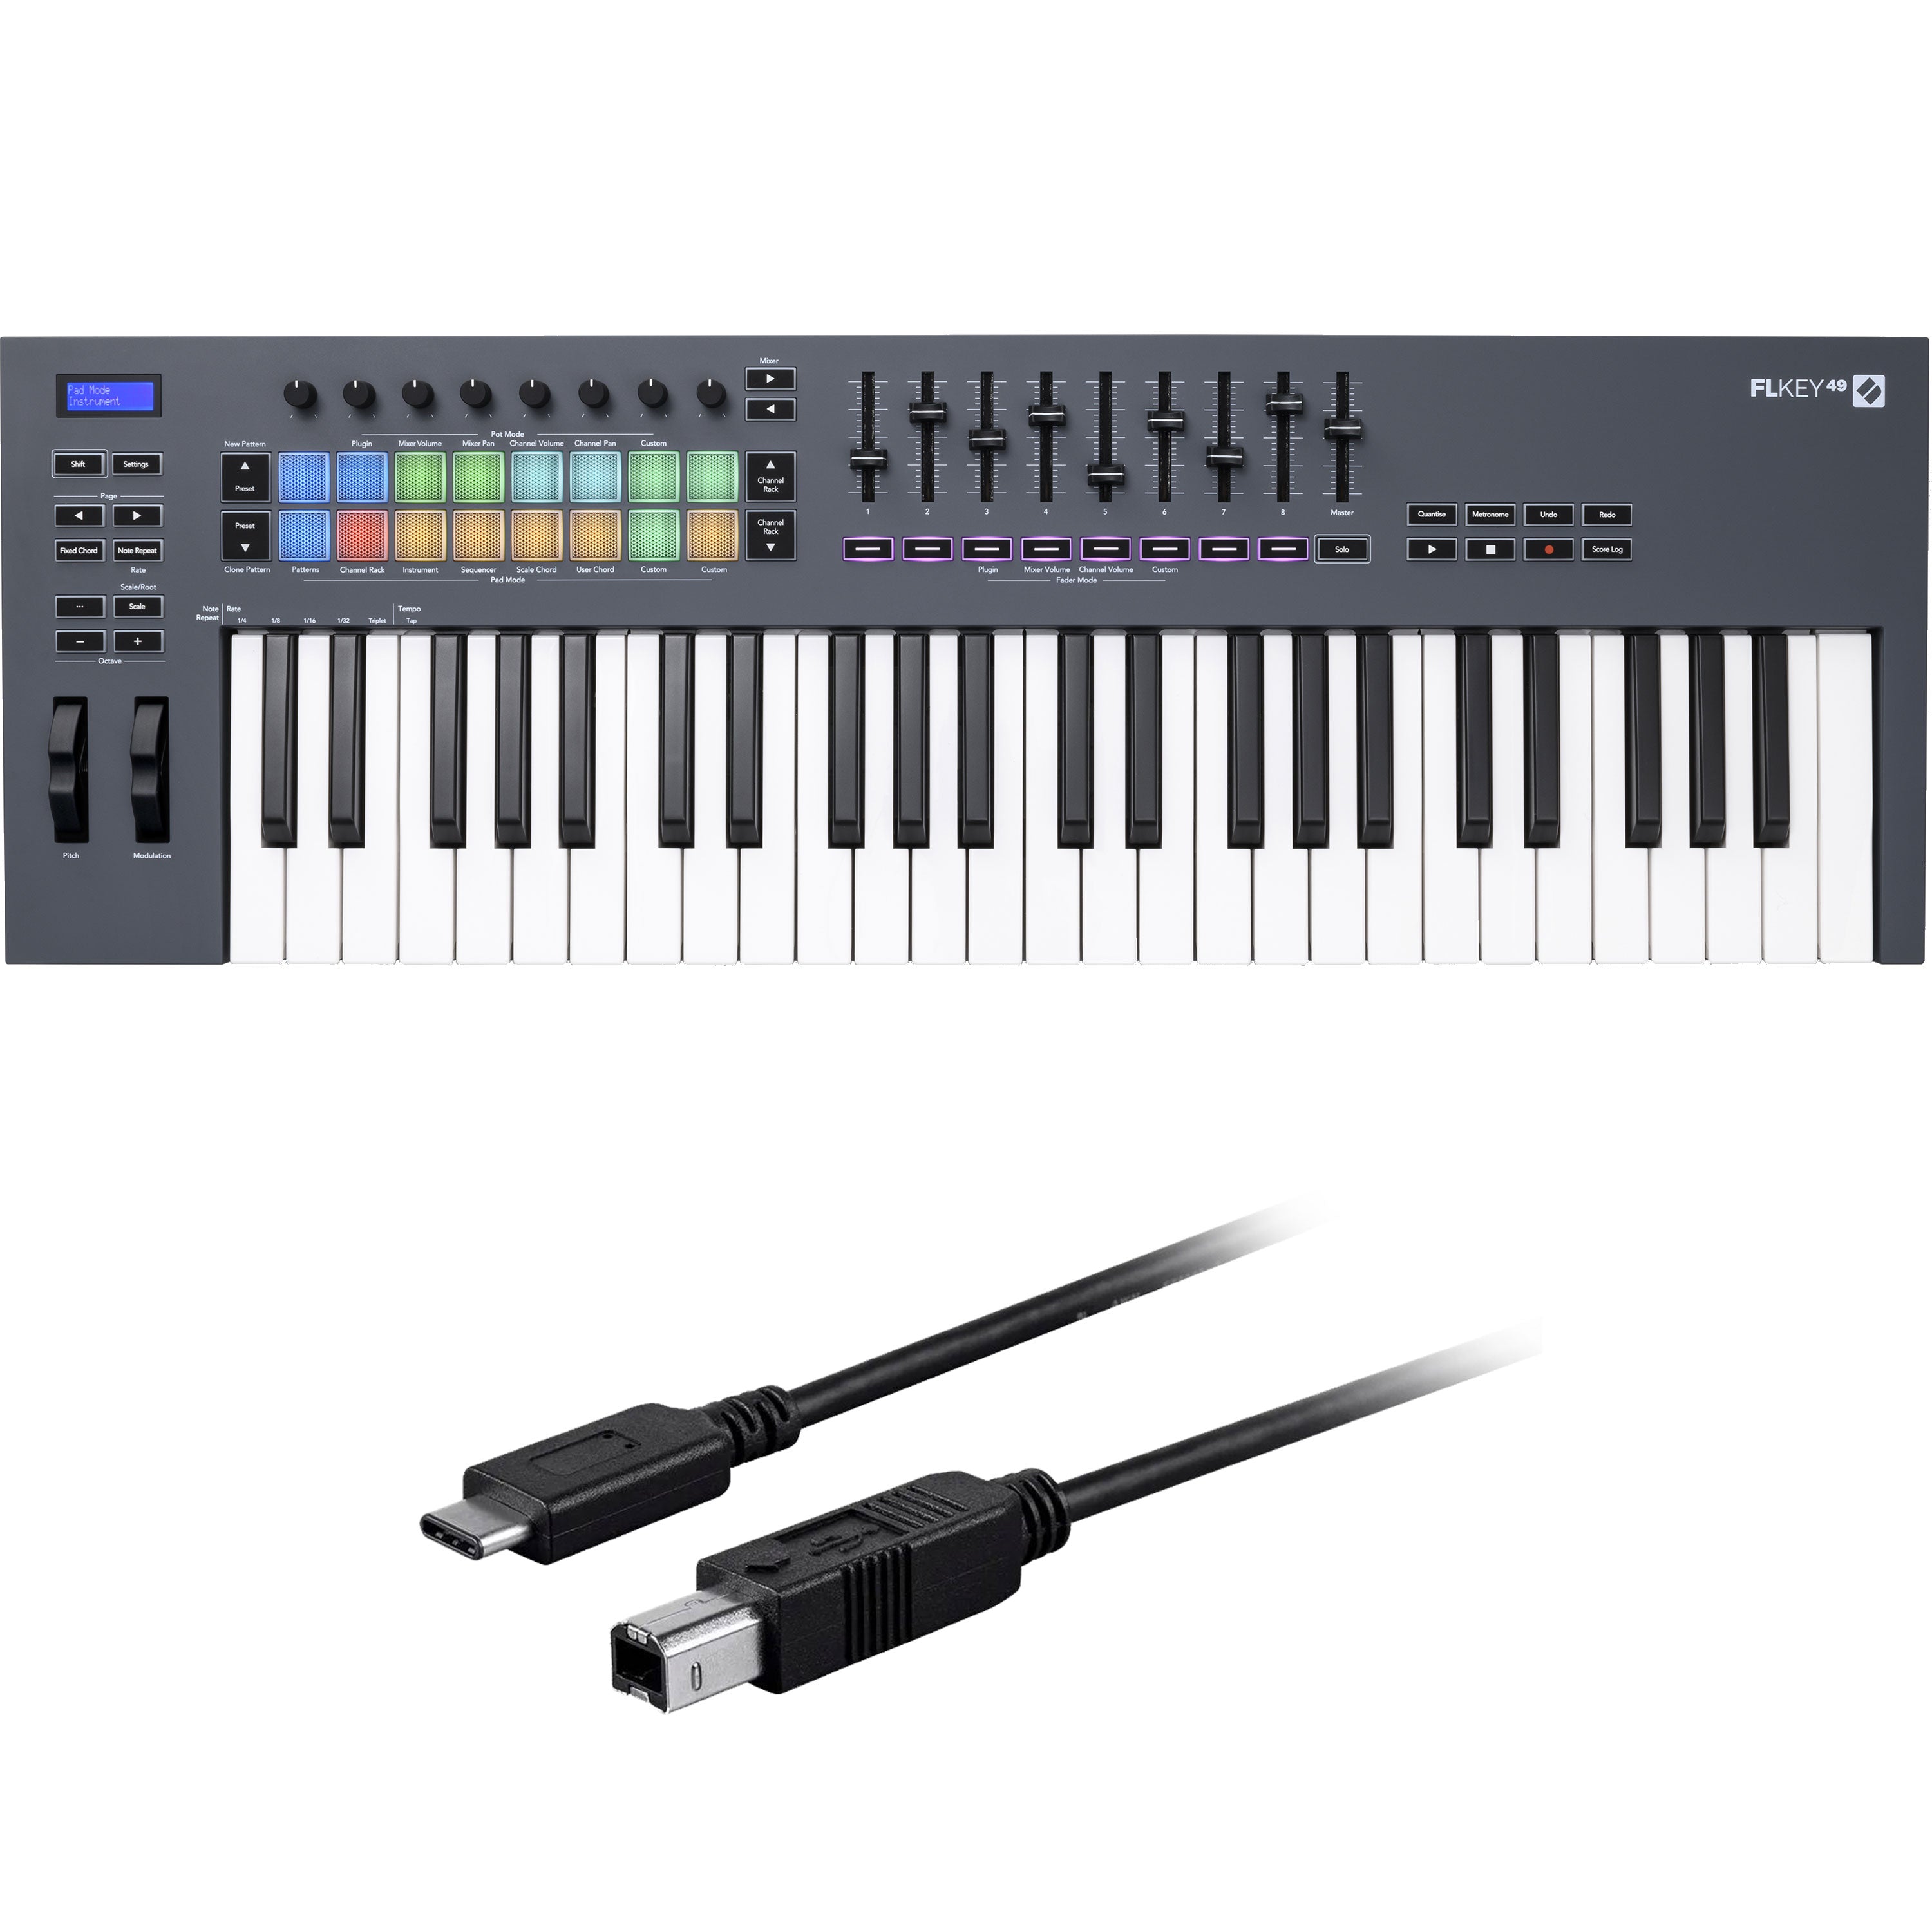 Collage showing components in Novation FLkey 49 USB-MIDI Keyboard Controller for FL Studio CABLE KIT